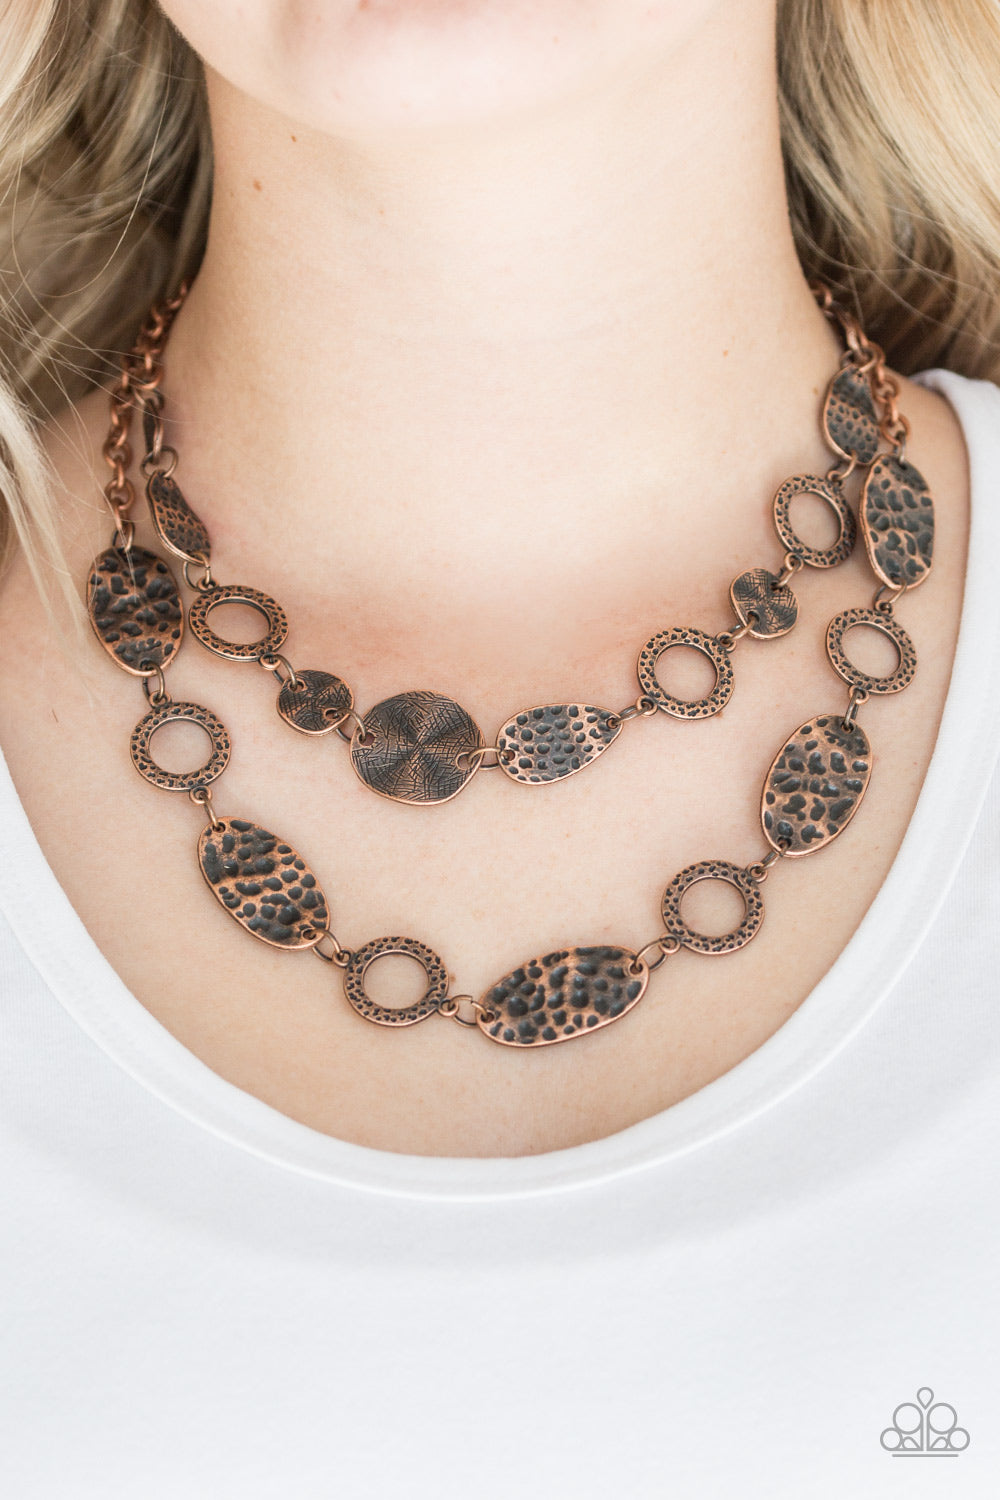 Trippin On Texture - Copper Paparazzi Jewelry 1652